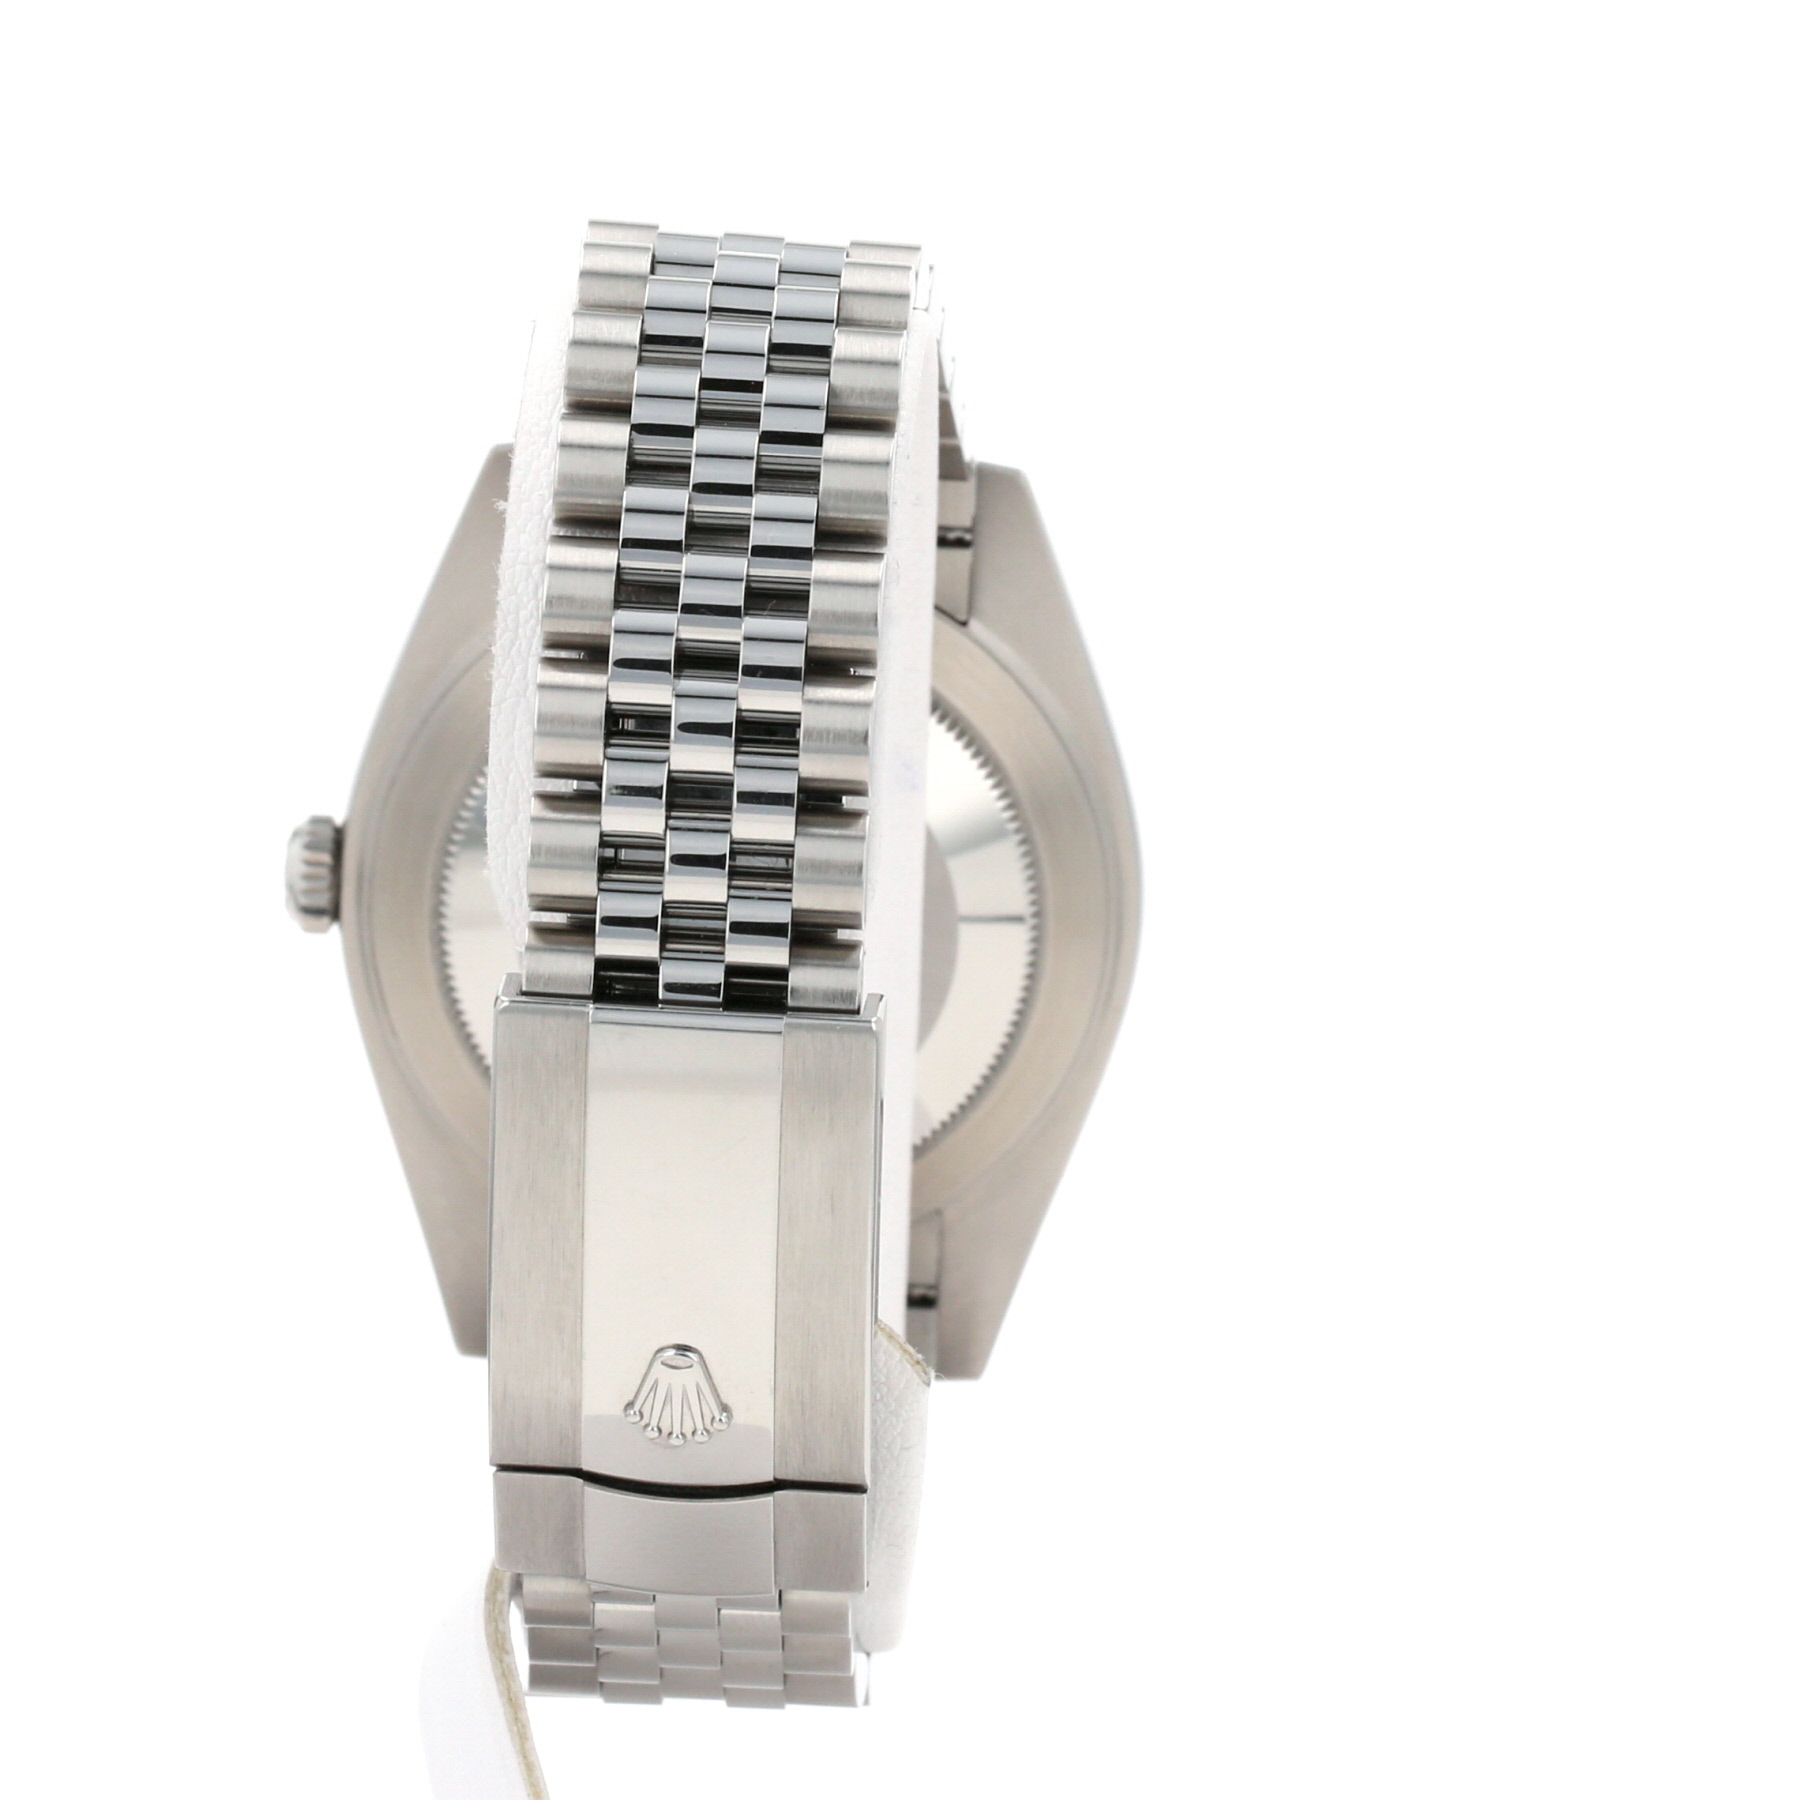 Datejust 41 In And Stainless Steel Ref: 126334